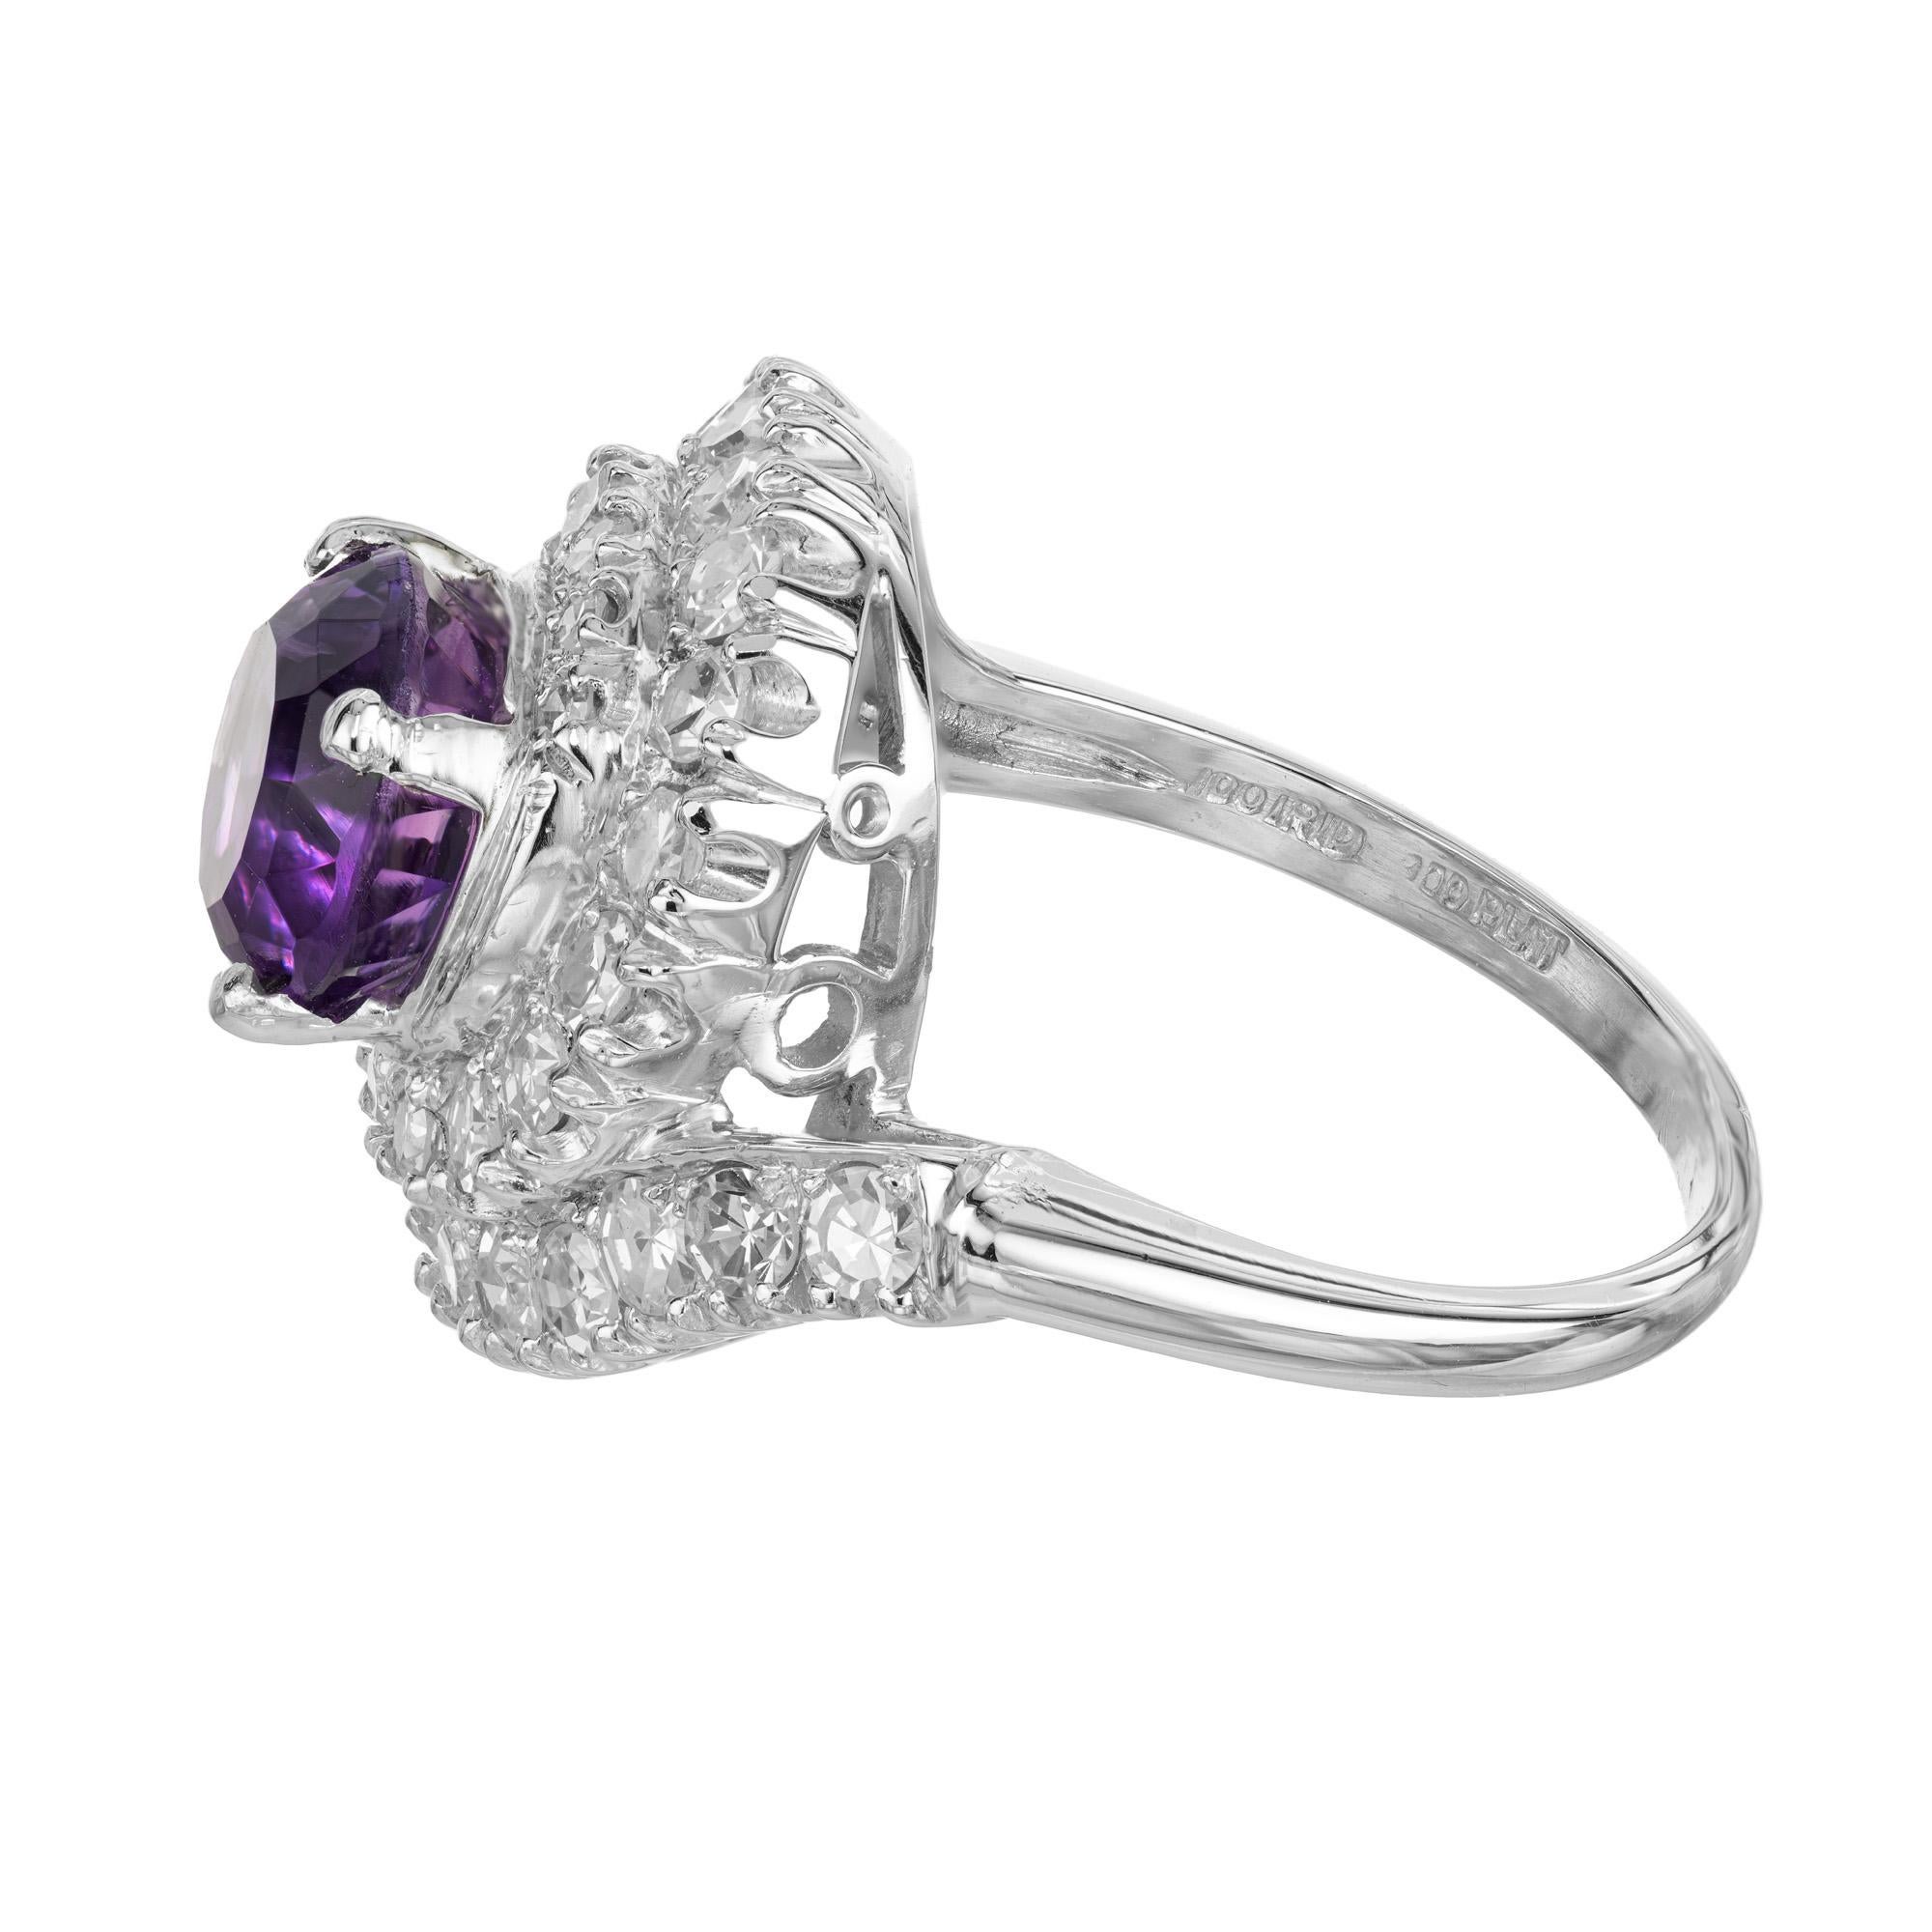 1.85 Carat Round Amethyst Diamond Platinum Swirl Cocktail Ring  In Good Condition For Sale In Stamford, CT